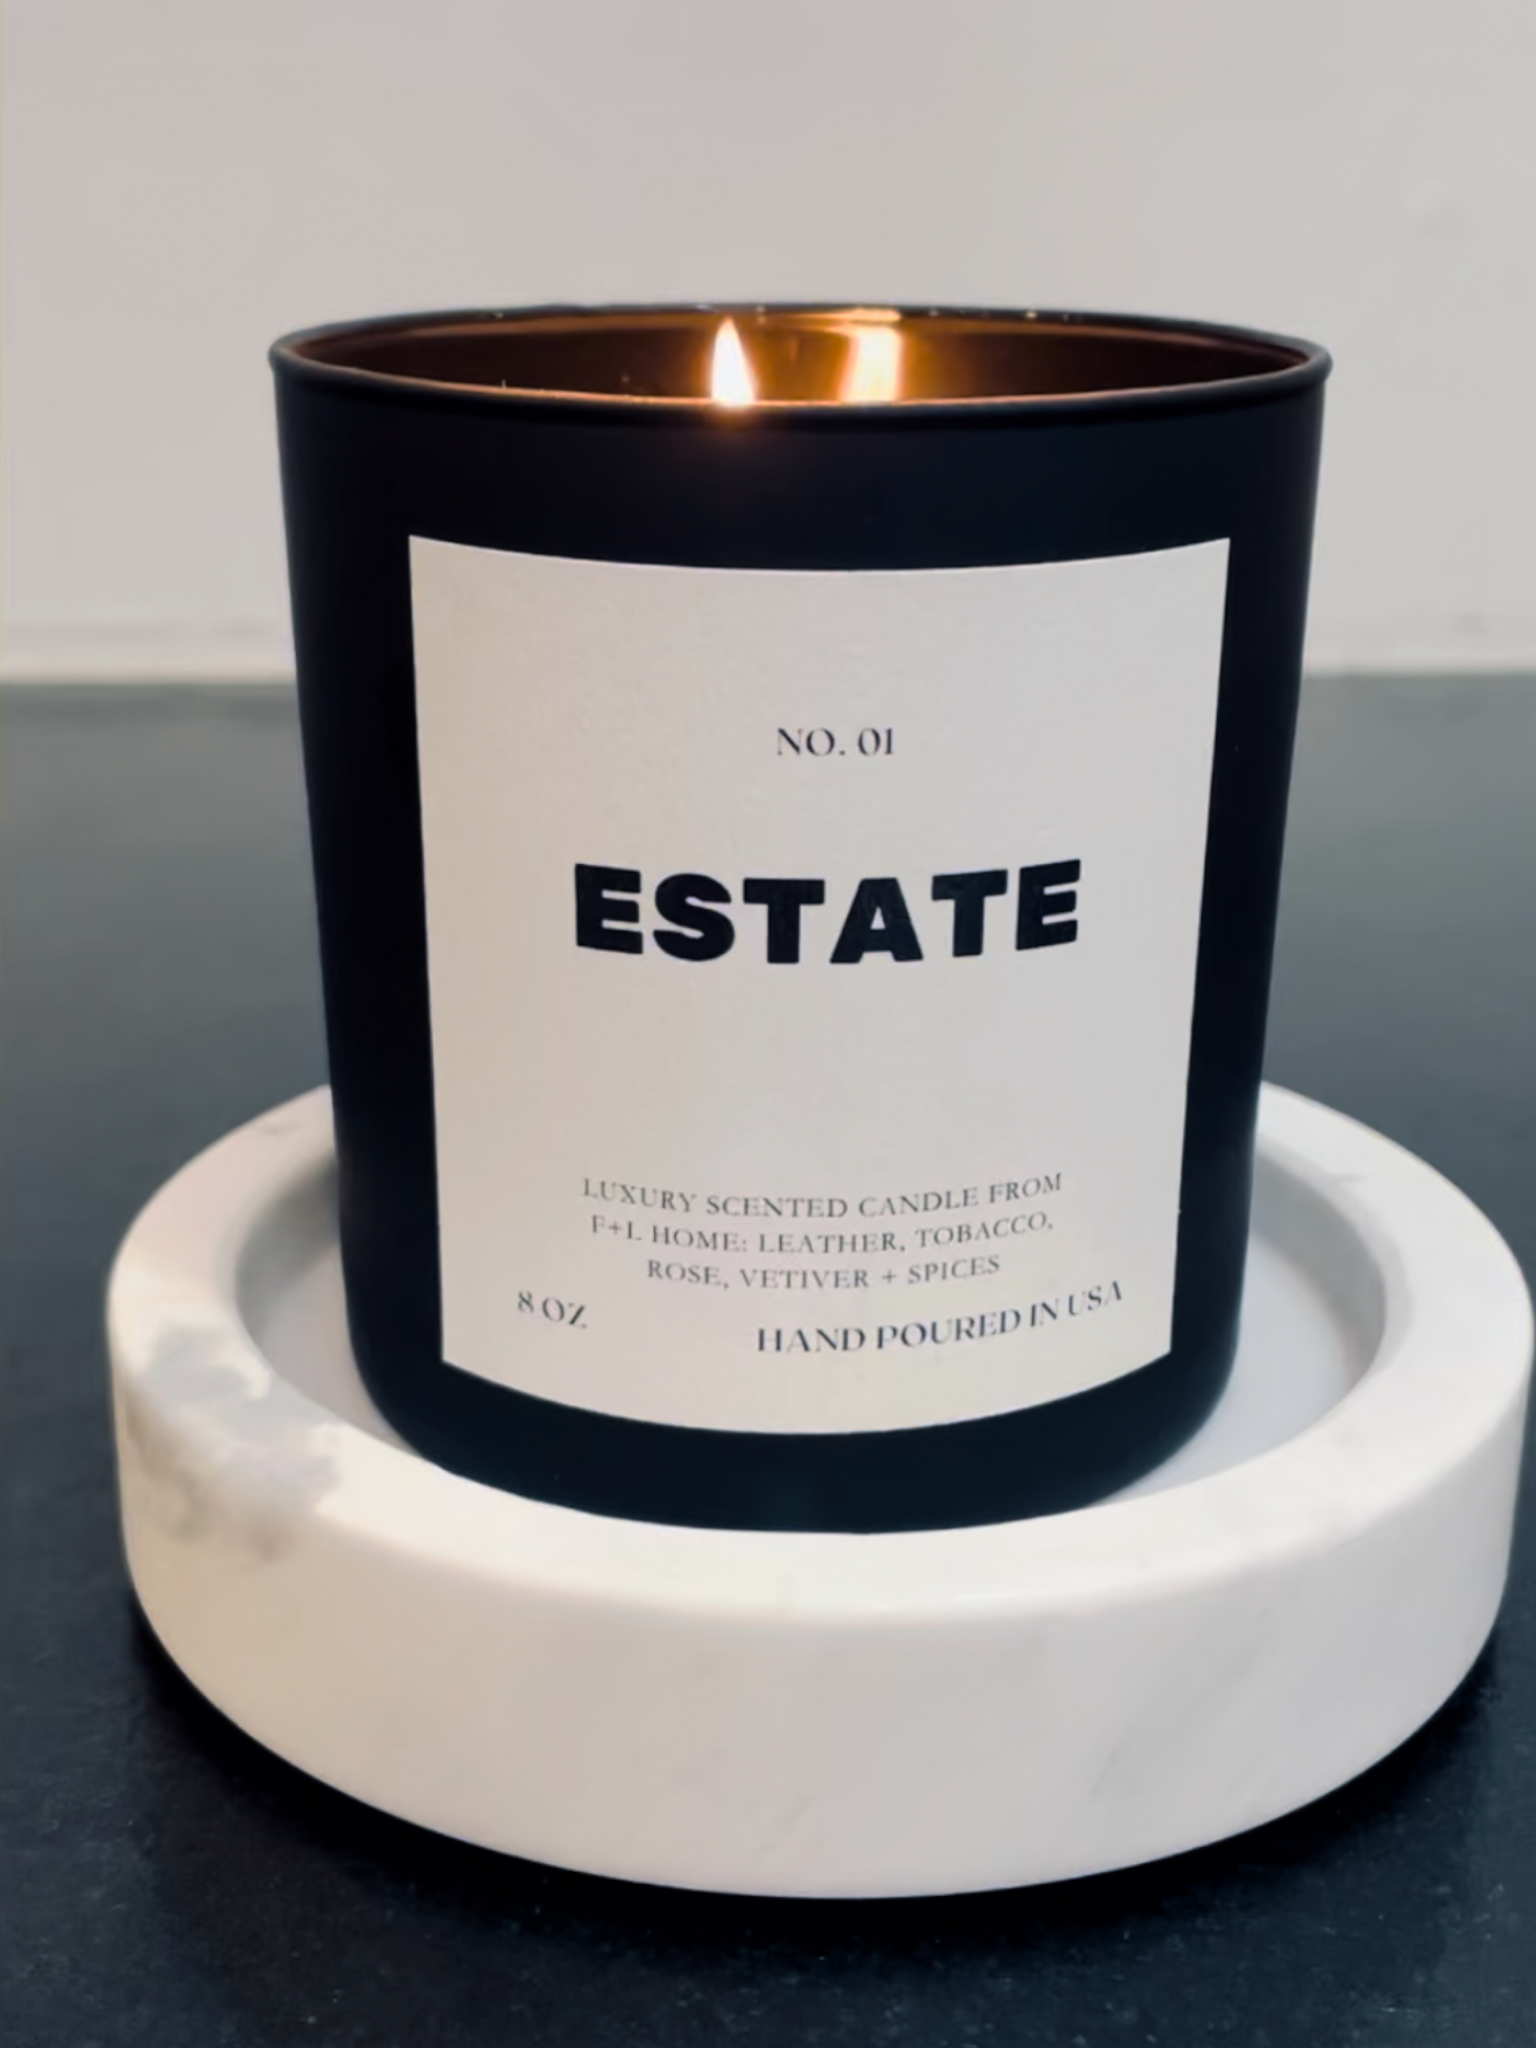 No. 01 Estate 8oz Soy Luxury Candle from F+L Home